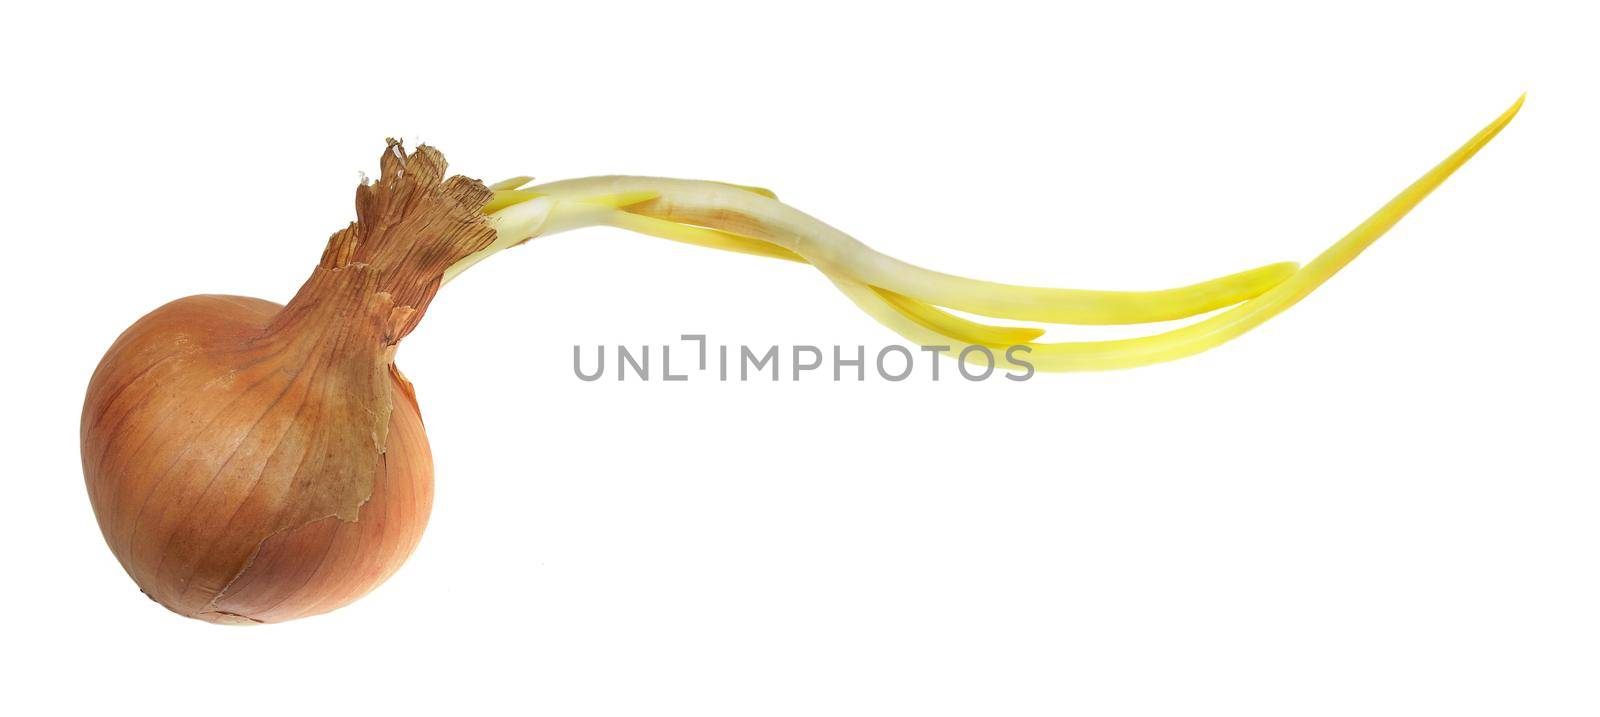 Green sprouted onion close up isolated on white background